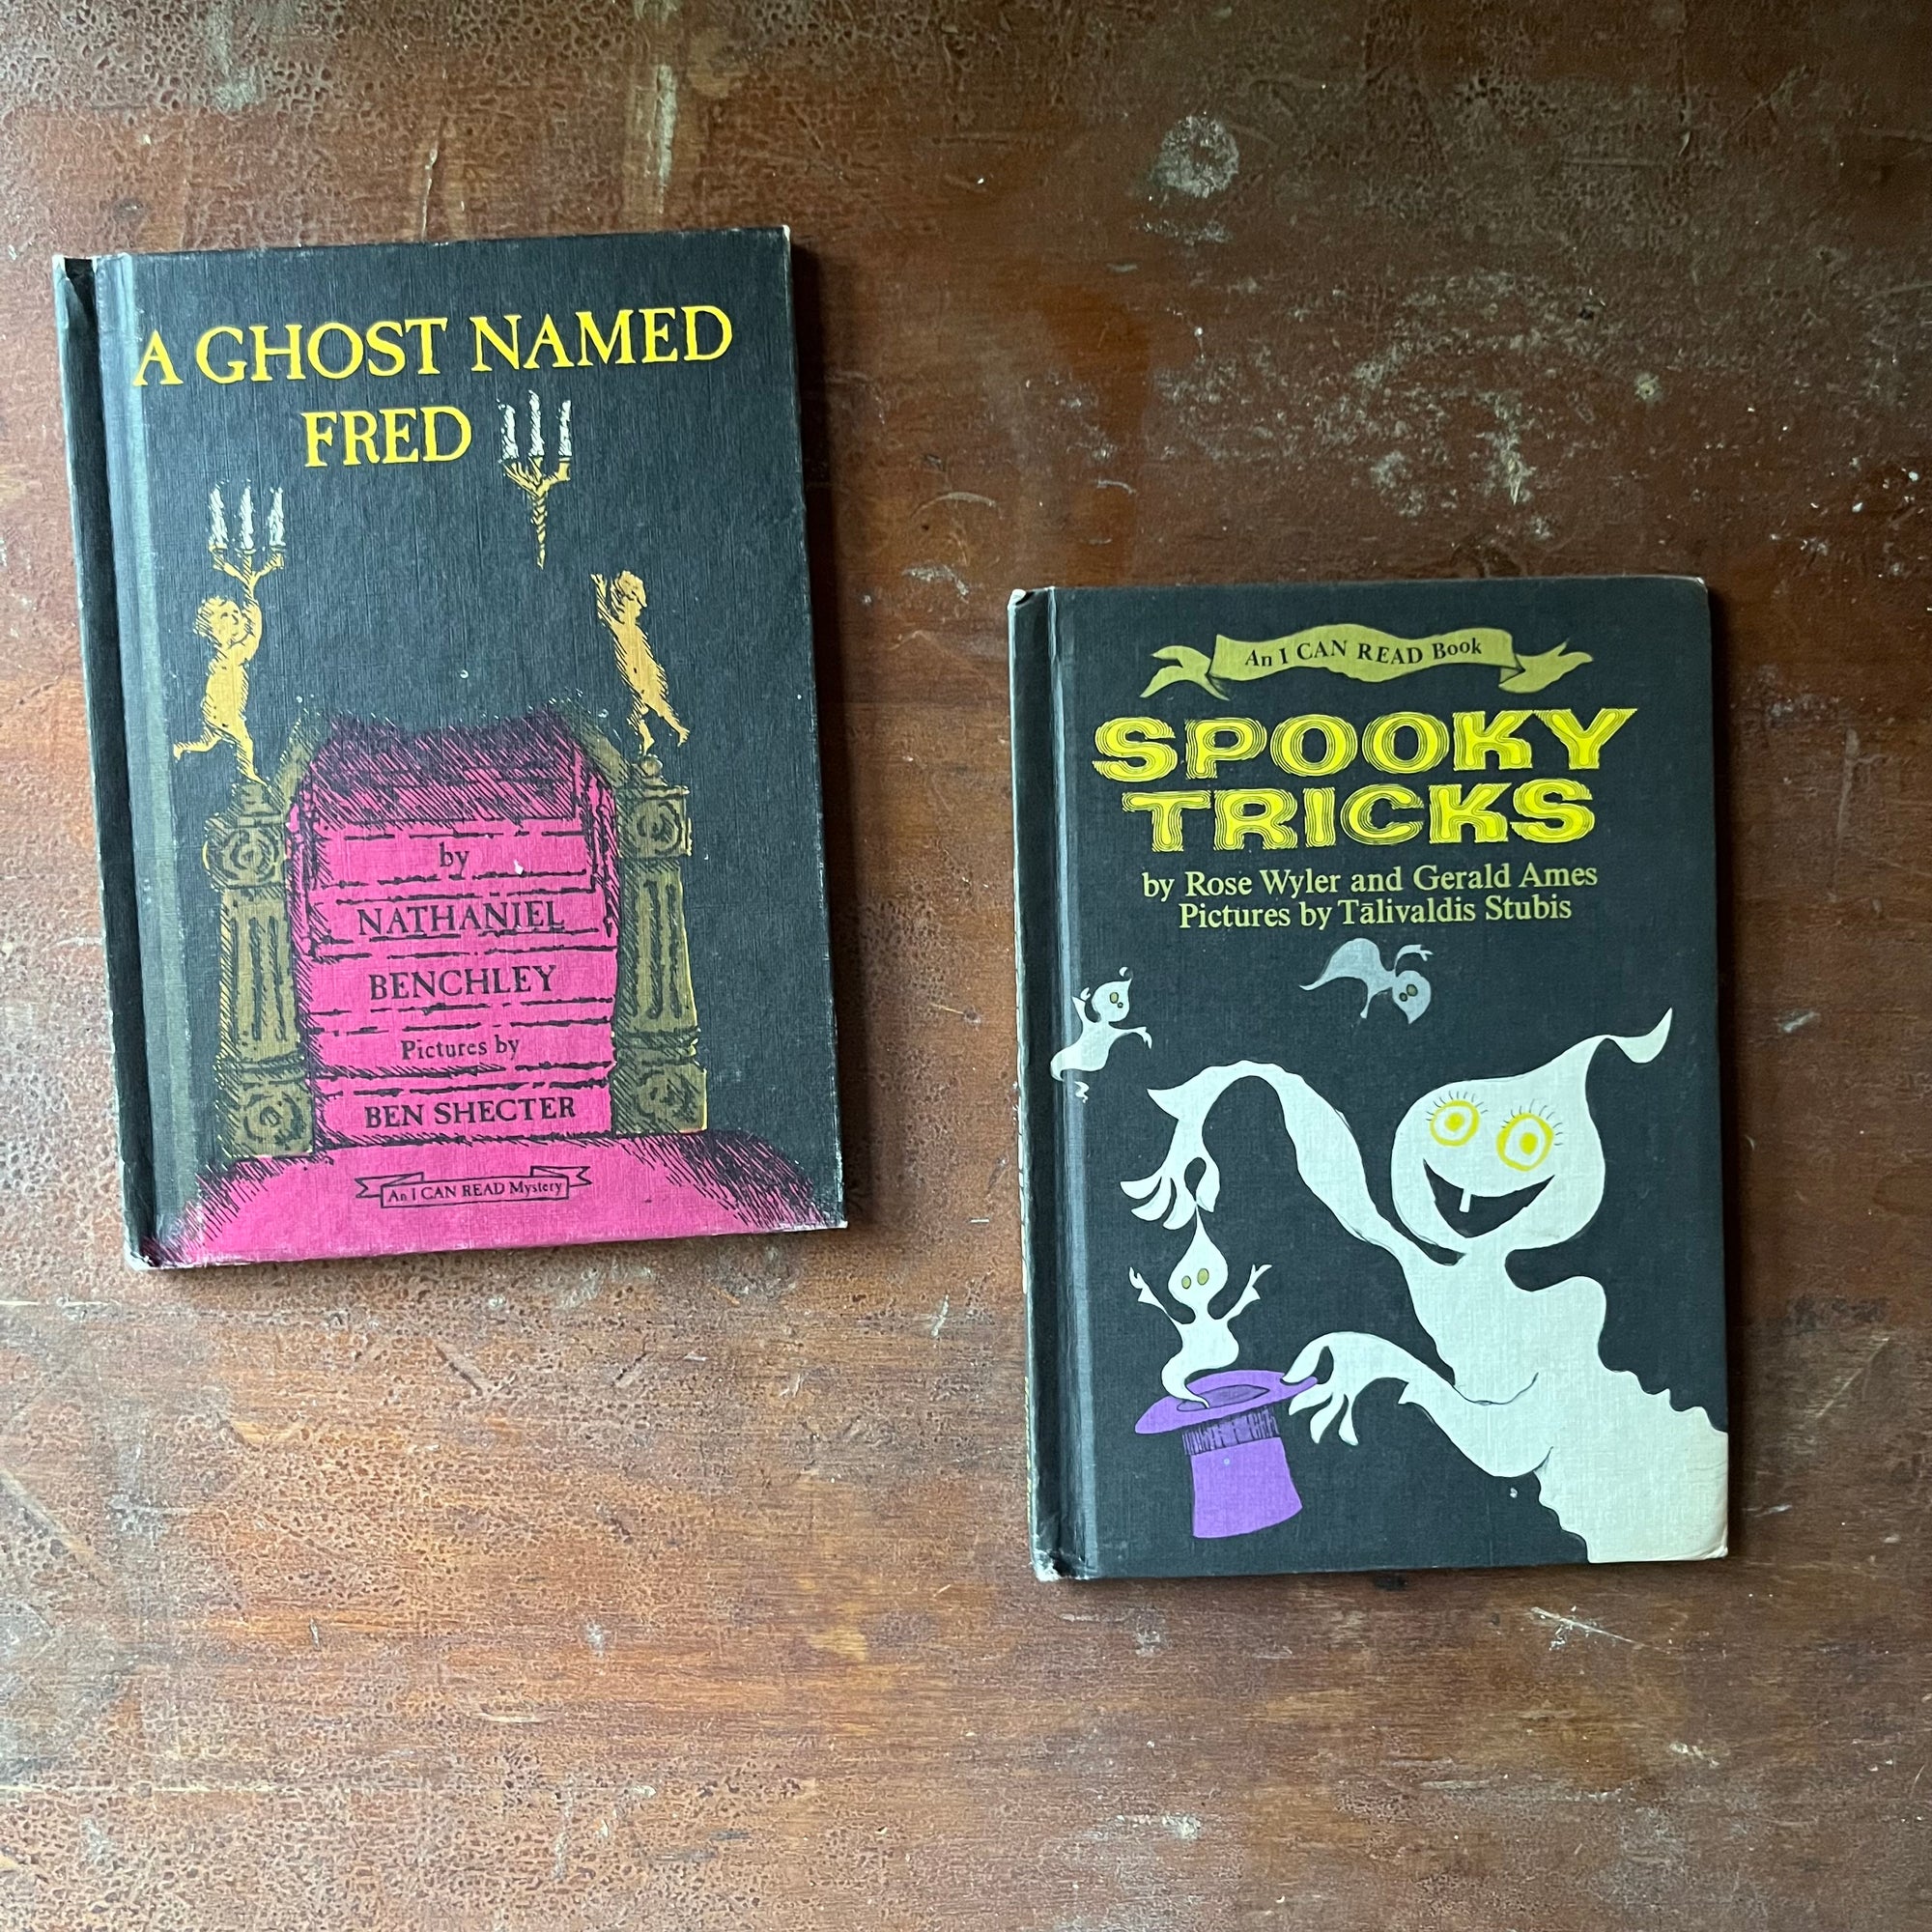 vintage children's picture book set, Halloween Books for Children, An I Can Read Book Set - A Ghost Named Fred written by Nathaniel Benchley & Spooky Tricks written by Rose Wyler & Gerald Ames - view of their front covers with spooky illustrations with ghosts